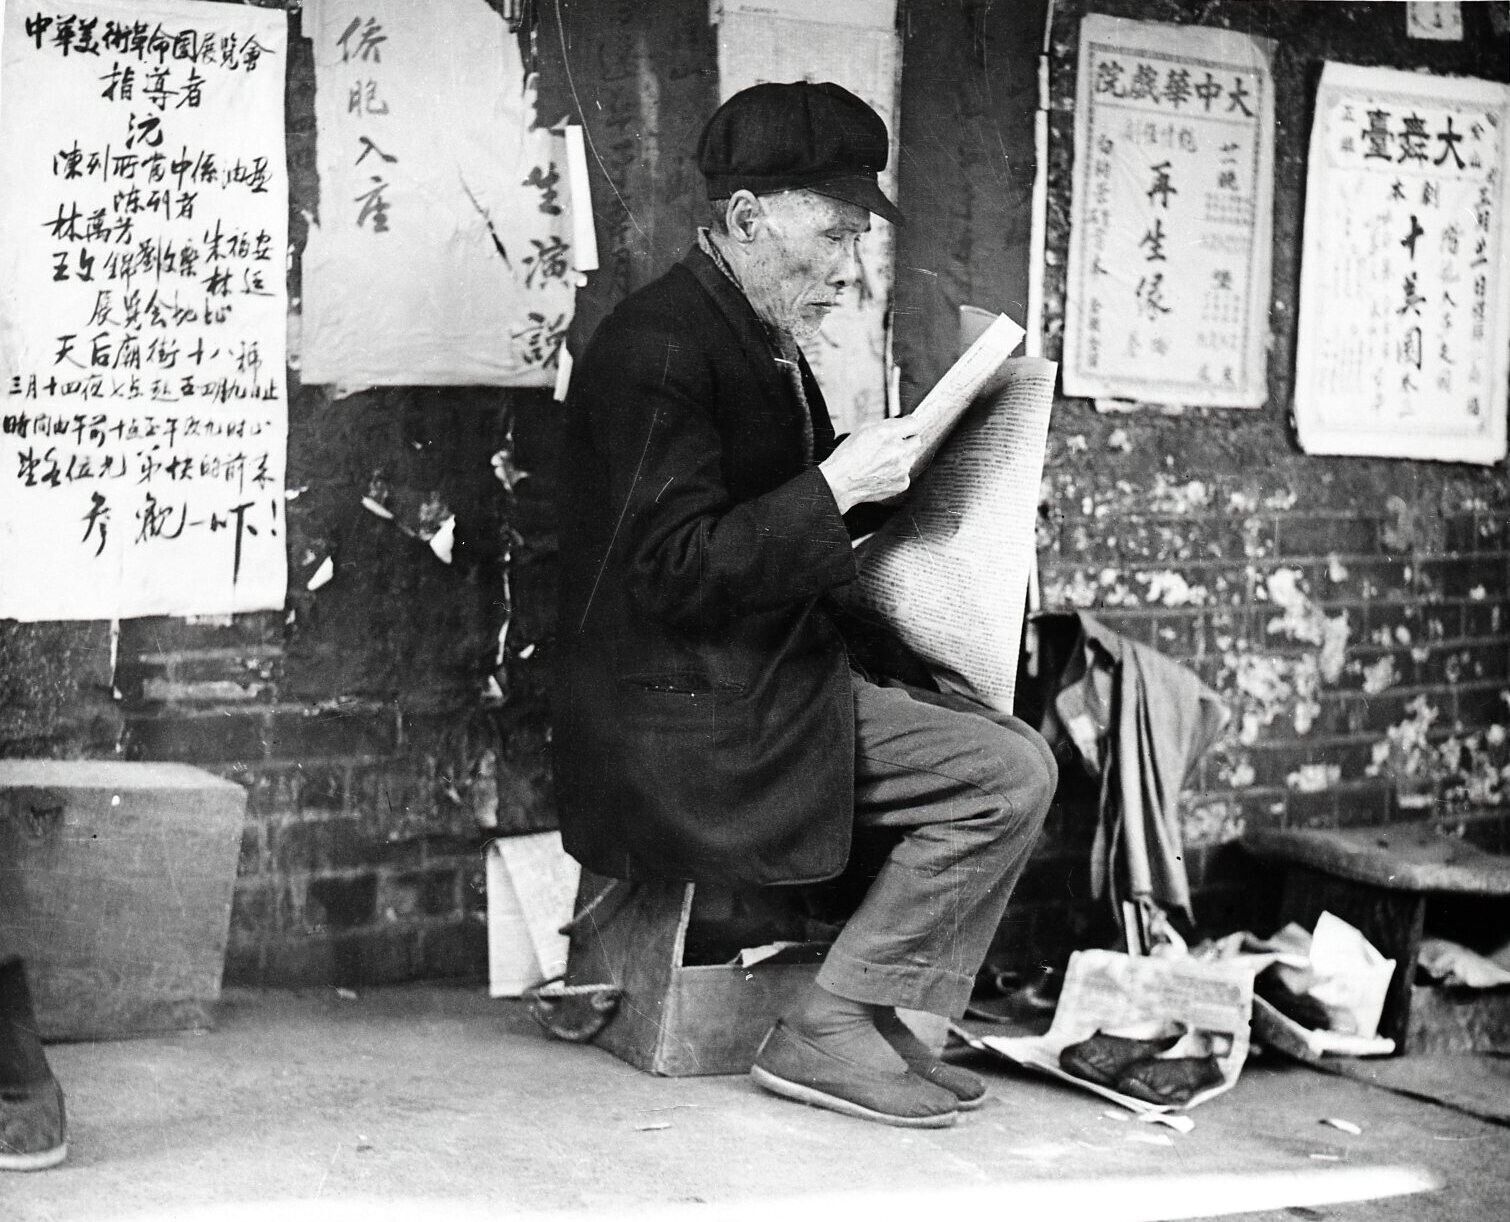 c.1920 SAN FRANCISCO CHINATOWN SCENE with CHINESE MAN READING NEWSPAPER~NEGATIVE